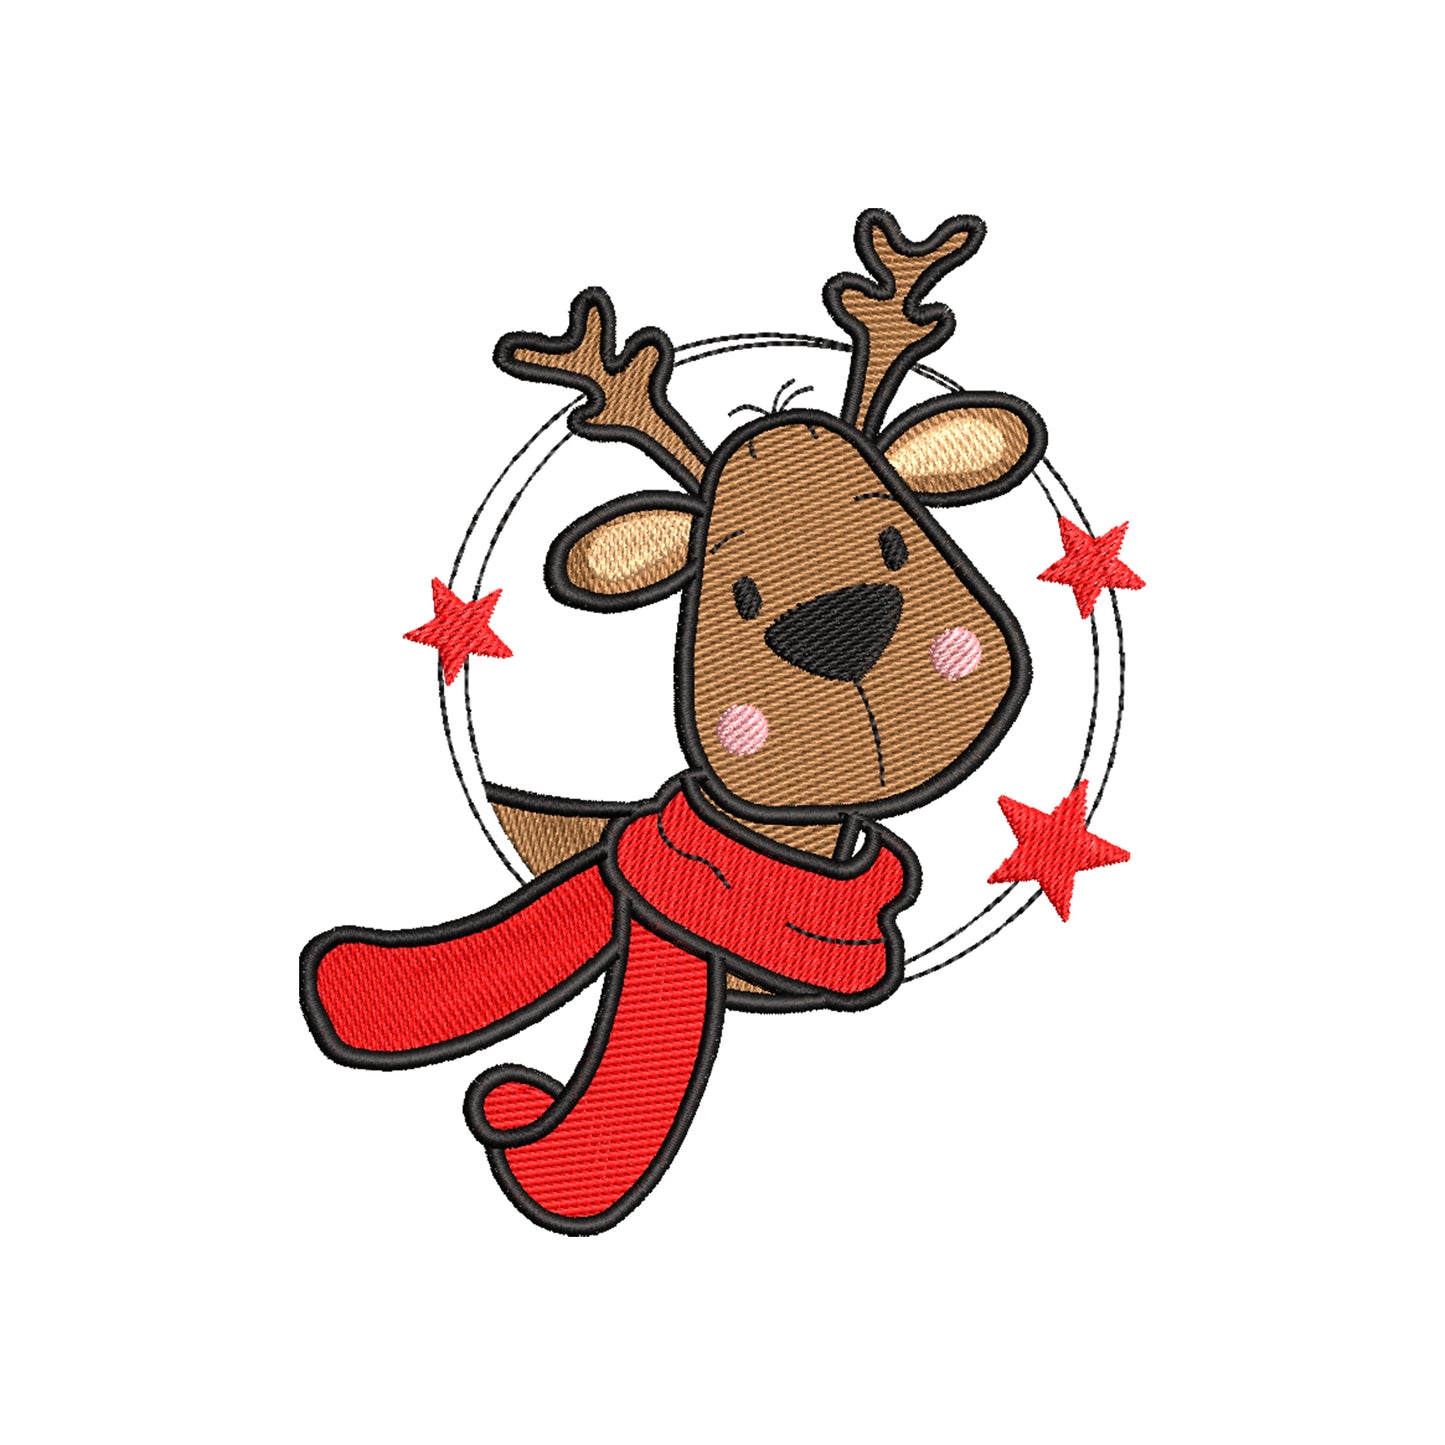 Christmas Deer embroidery designs with stars - 910304